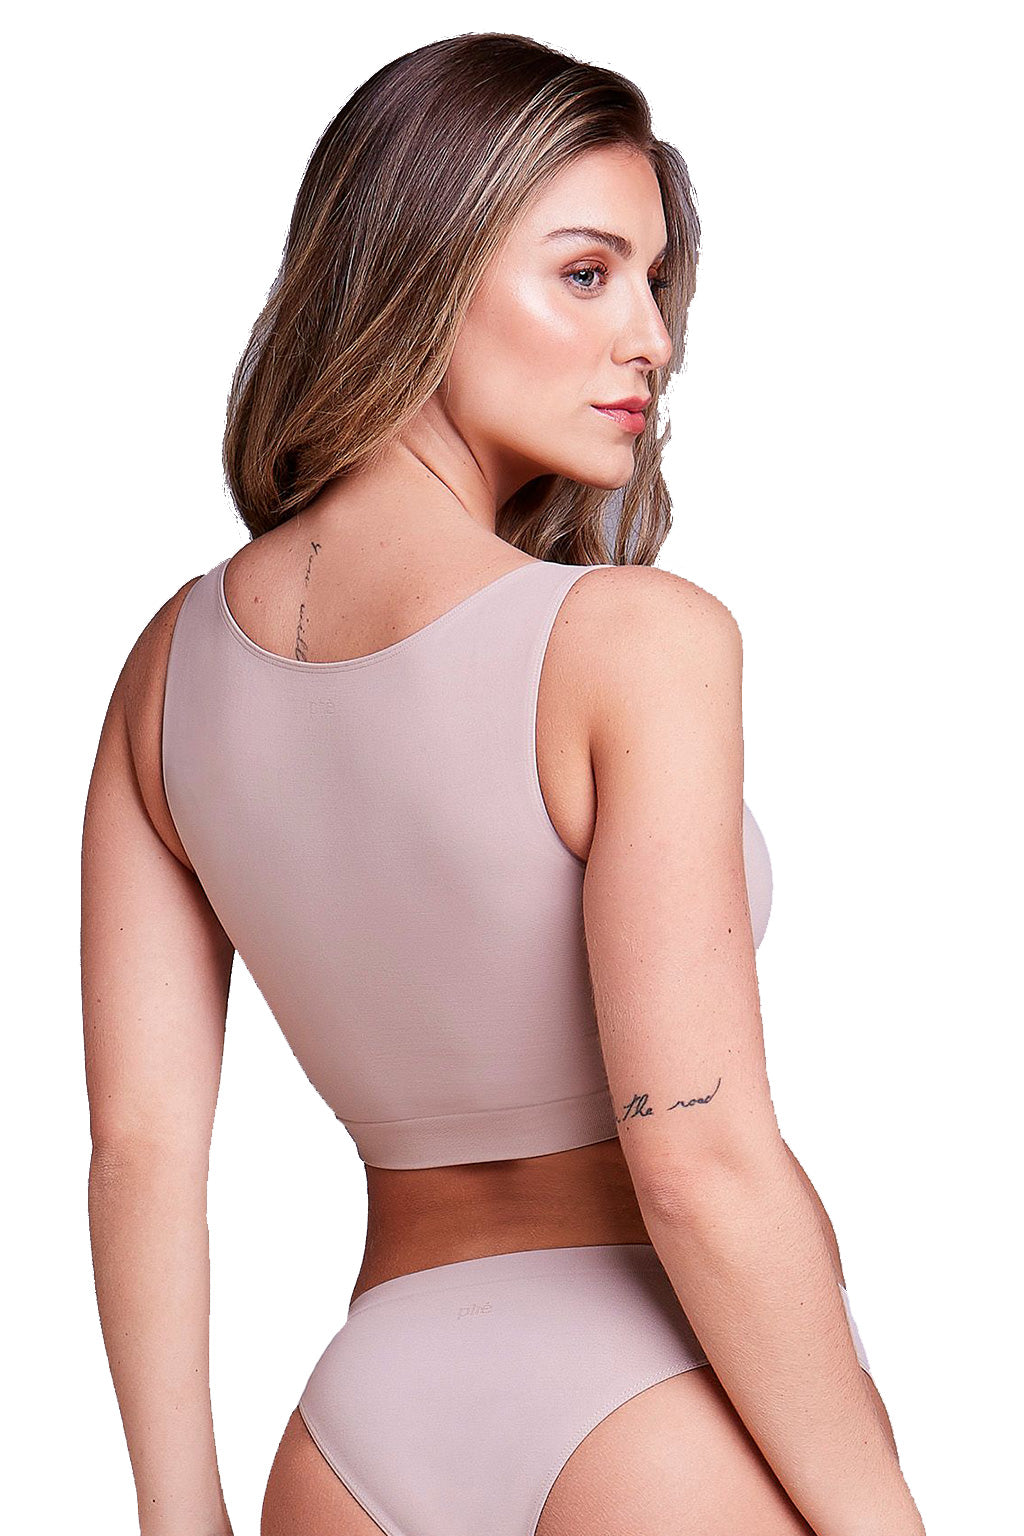 Post-surgery top Bra with adjustable straps